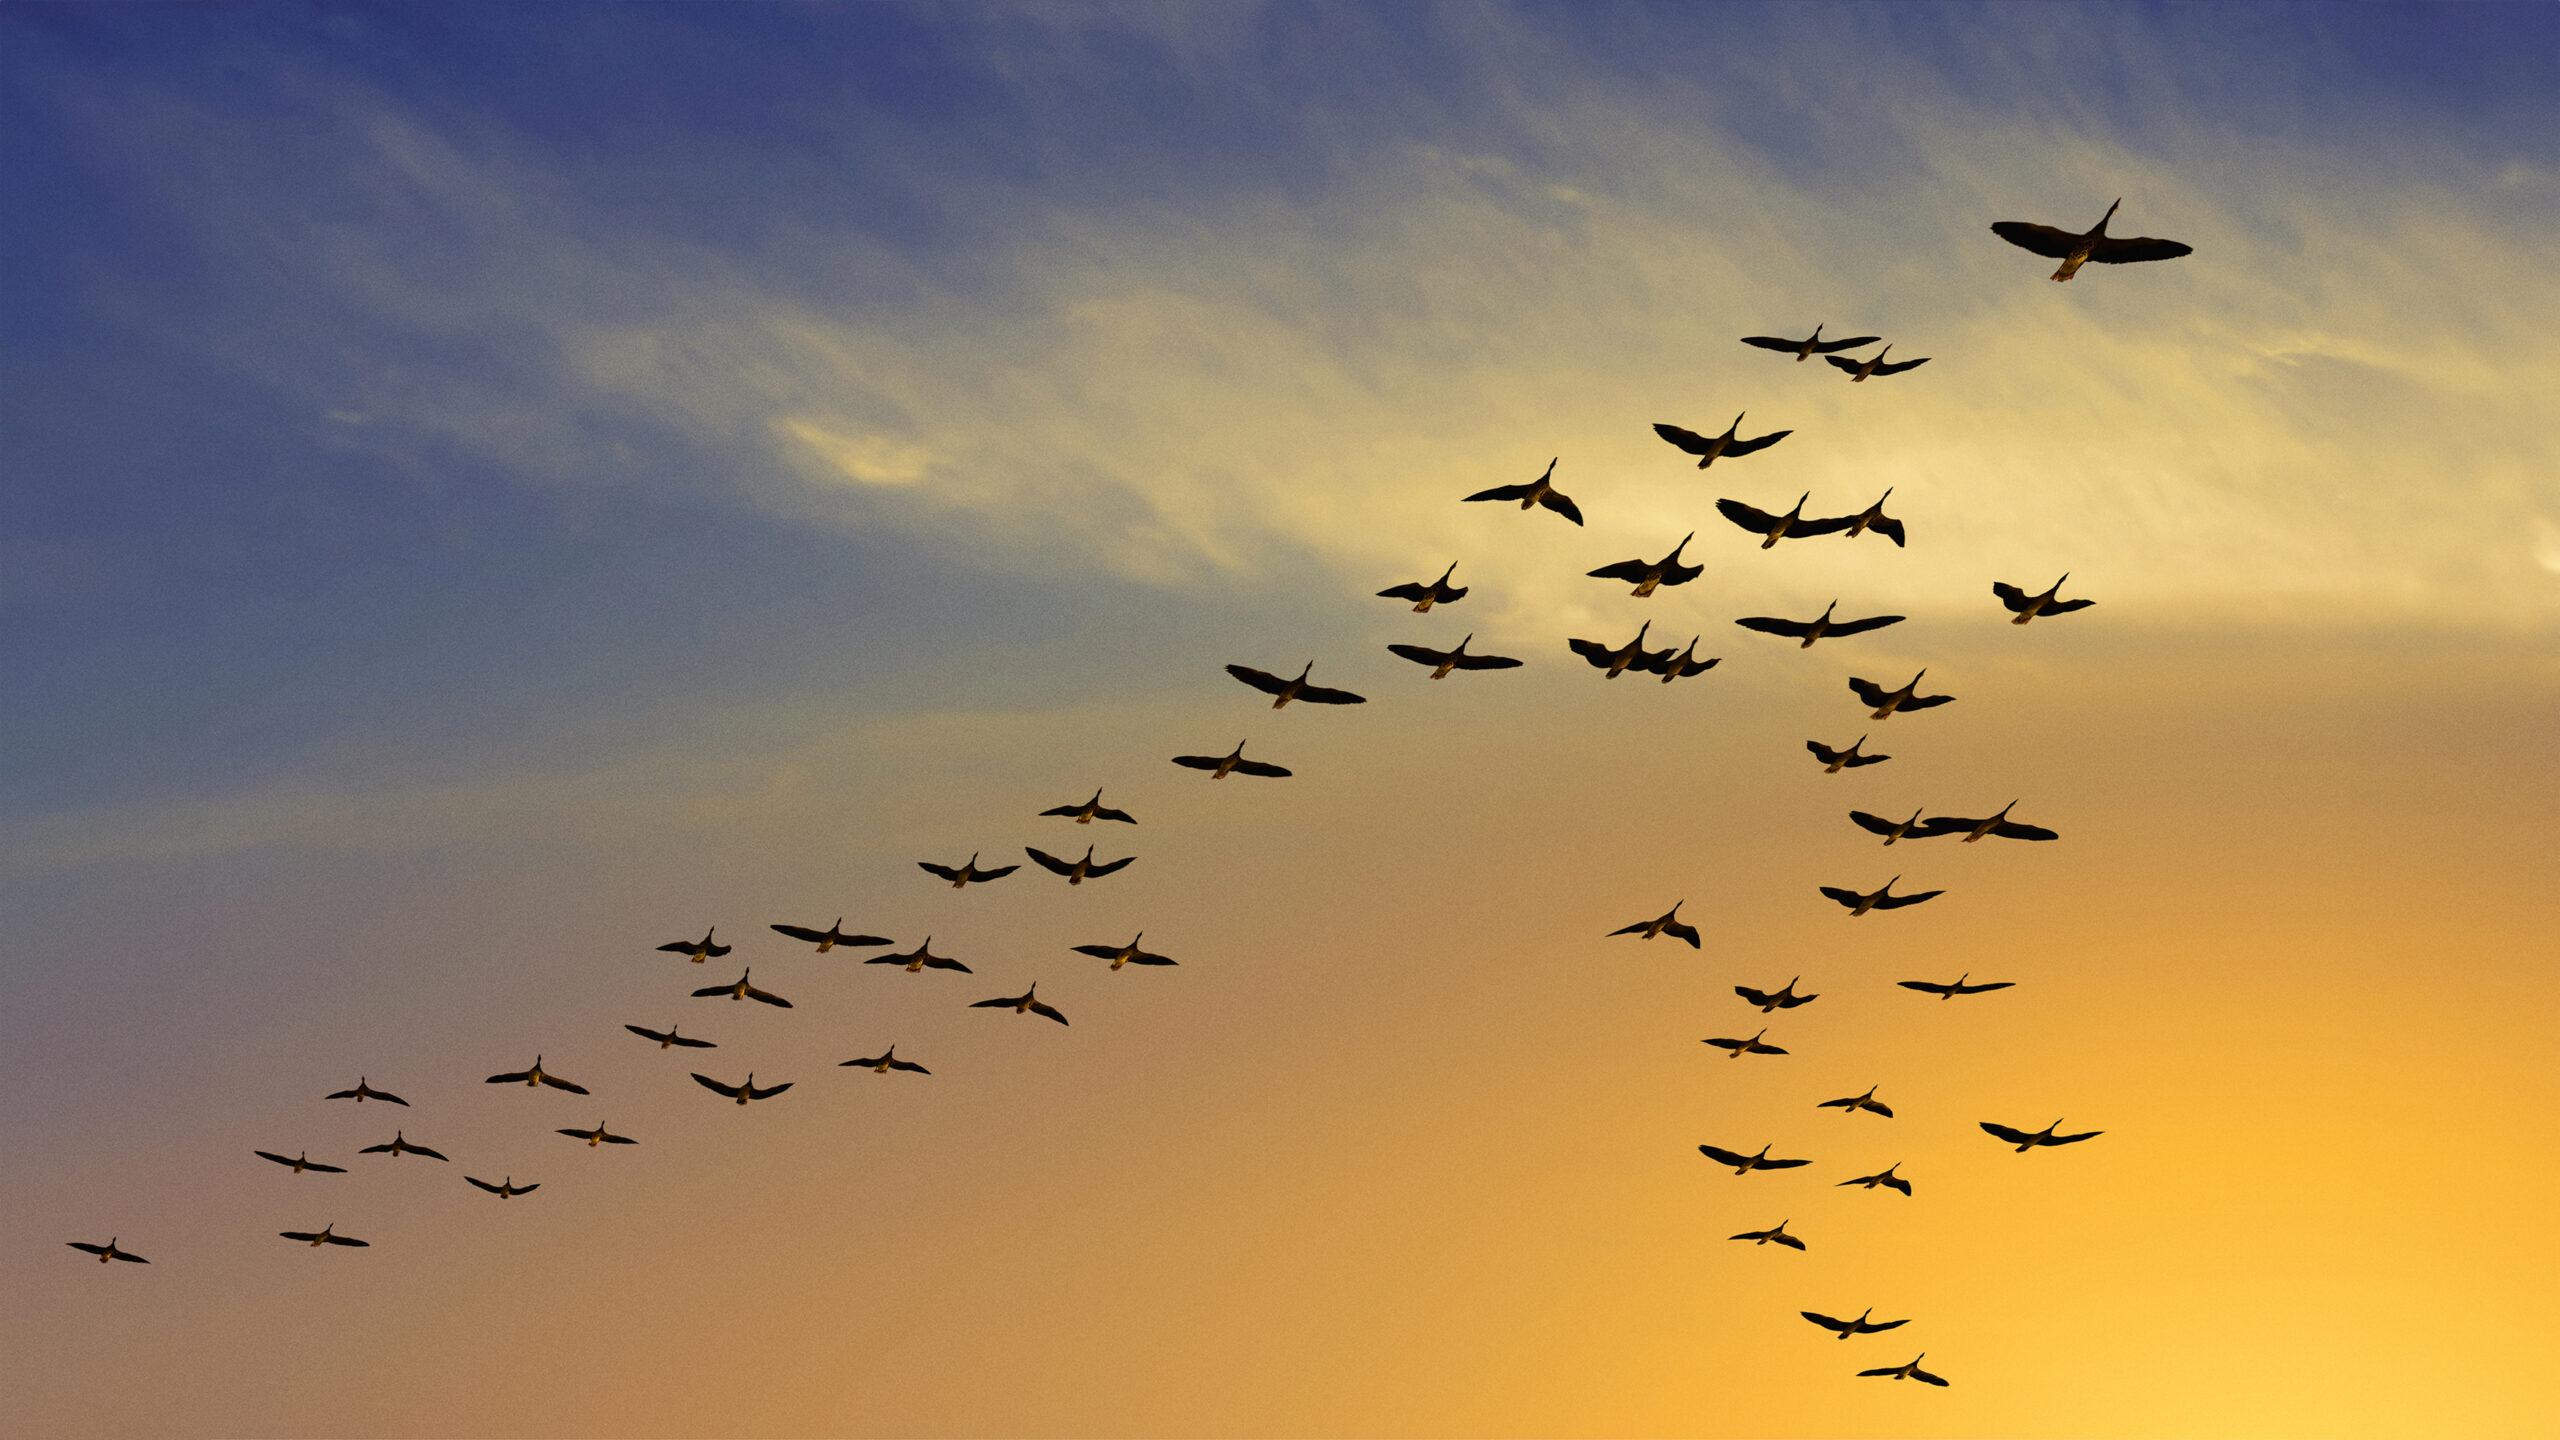 image of birds flying through the sky at dusk